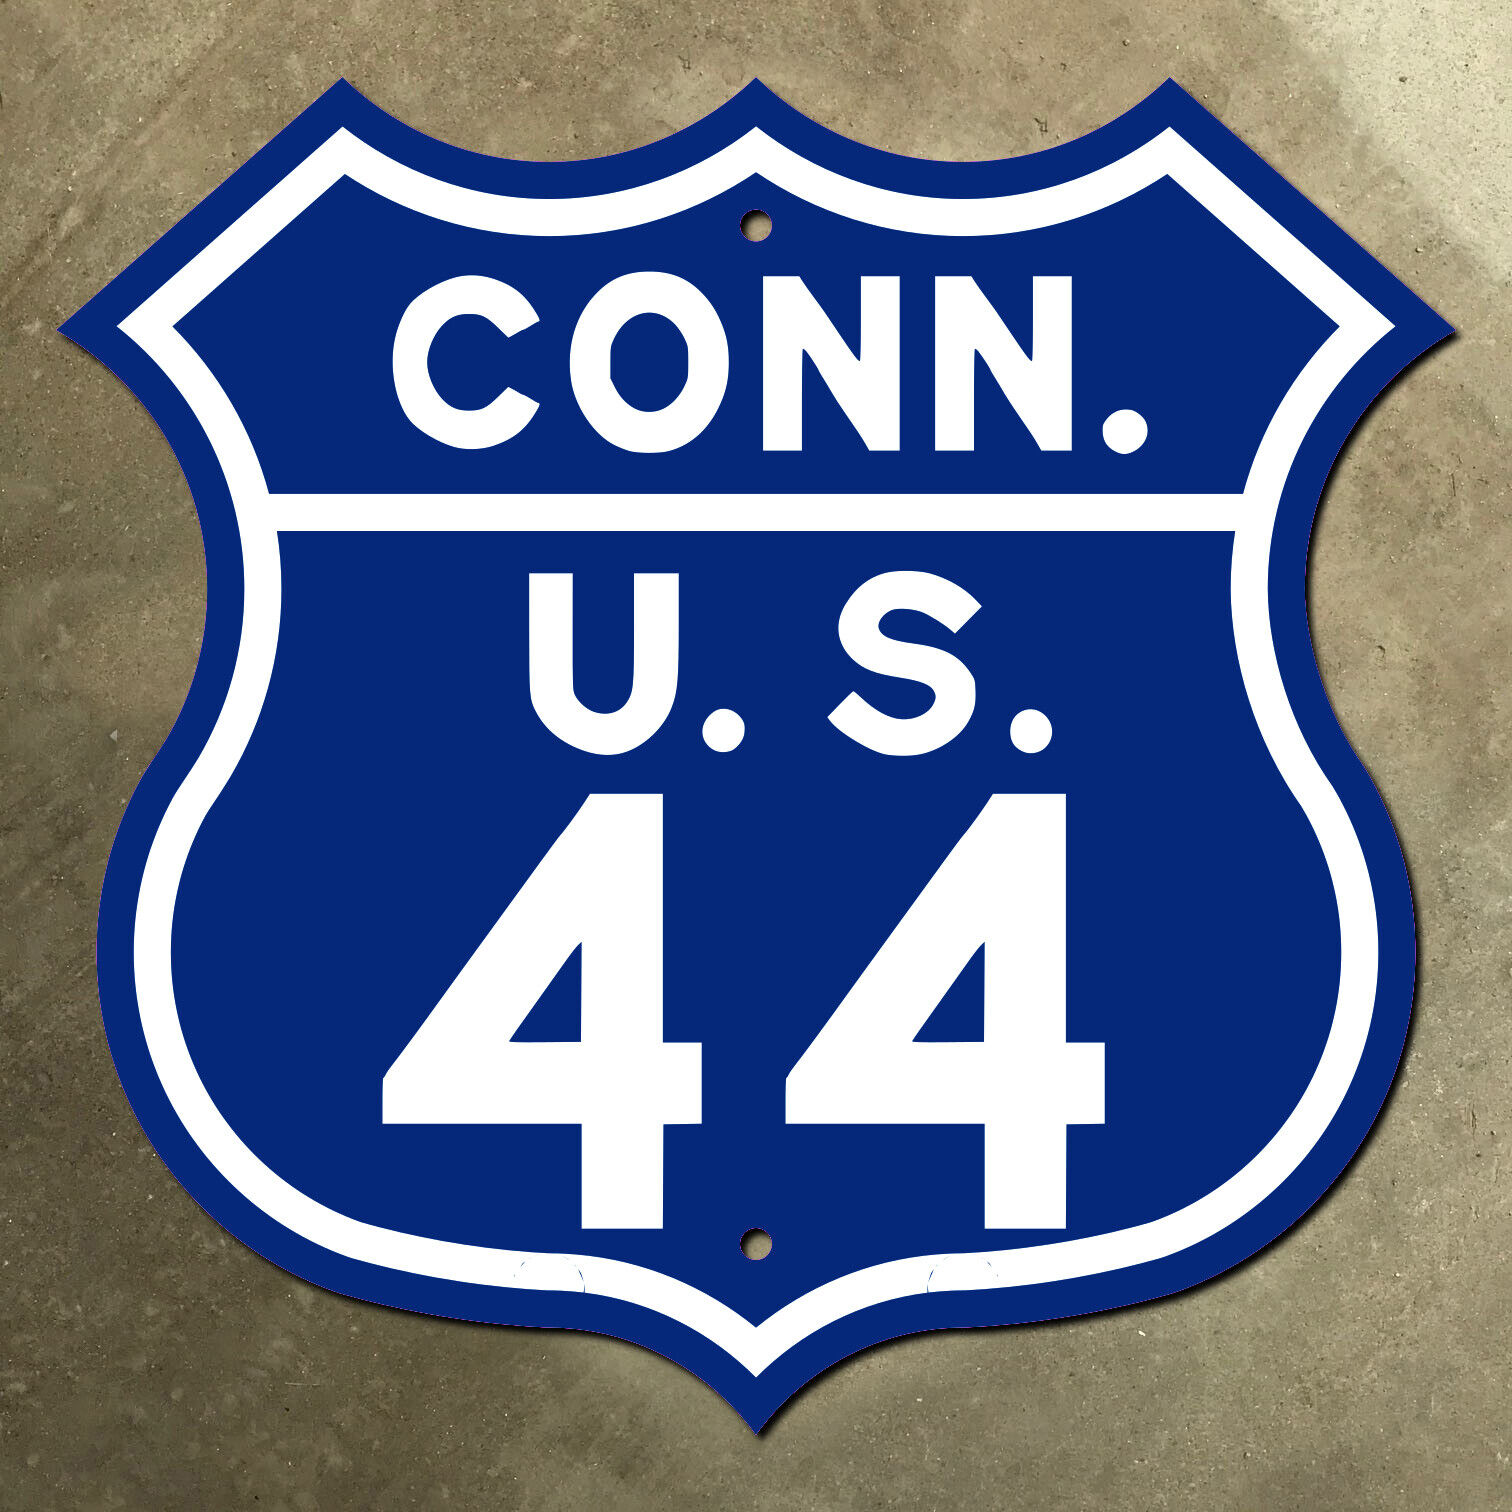 Connecticut US route 44 highway marker road sign shield 1957 blue Hartford